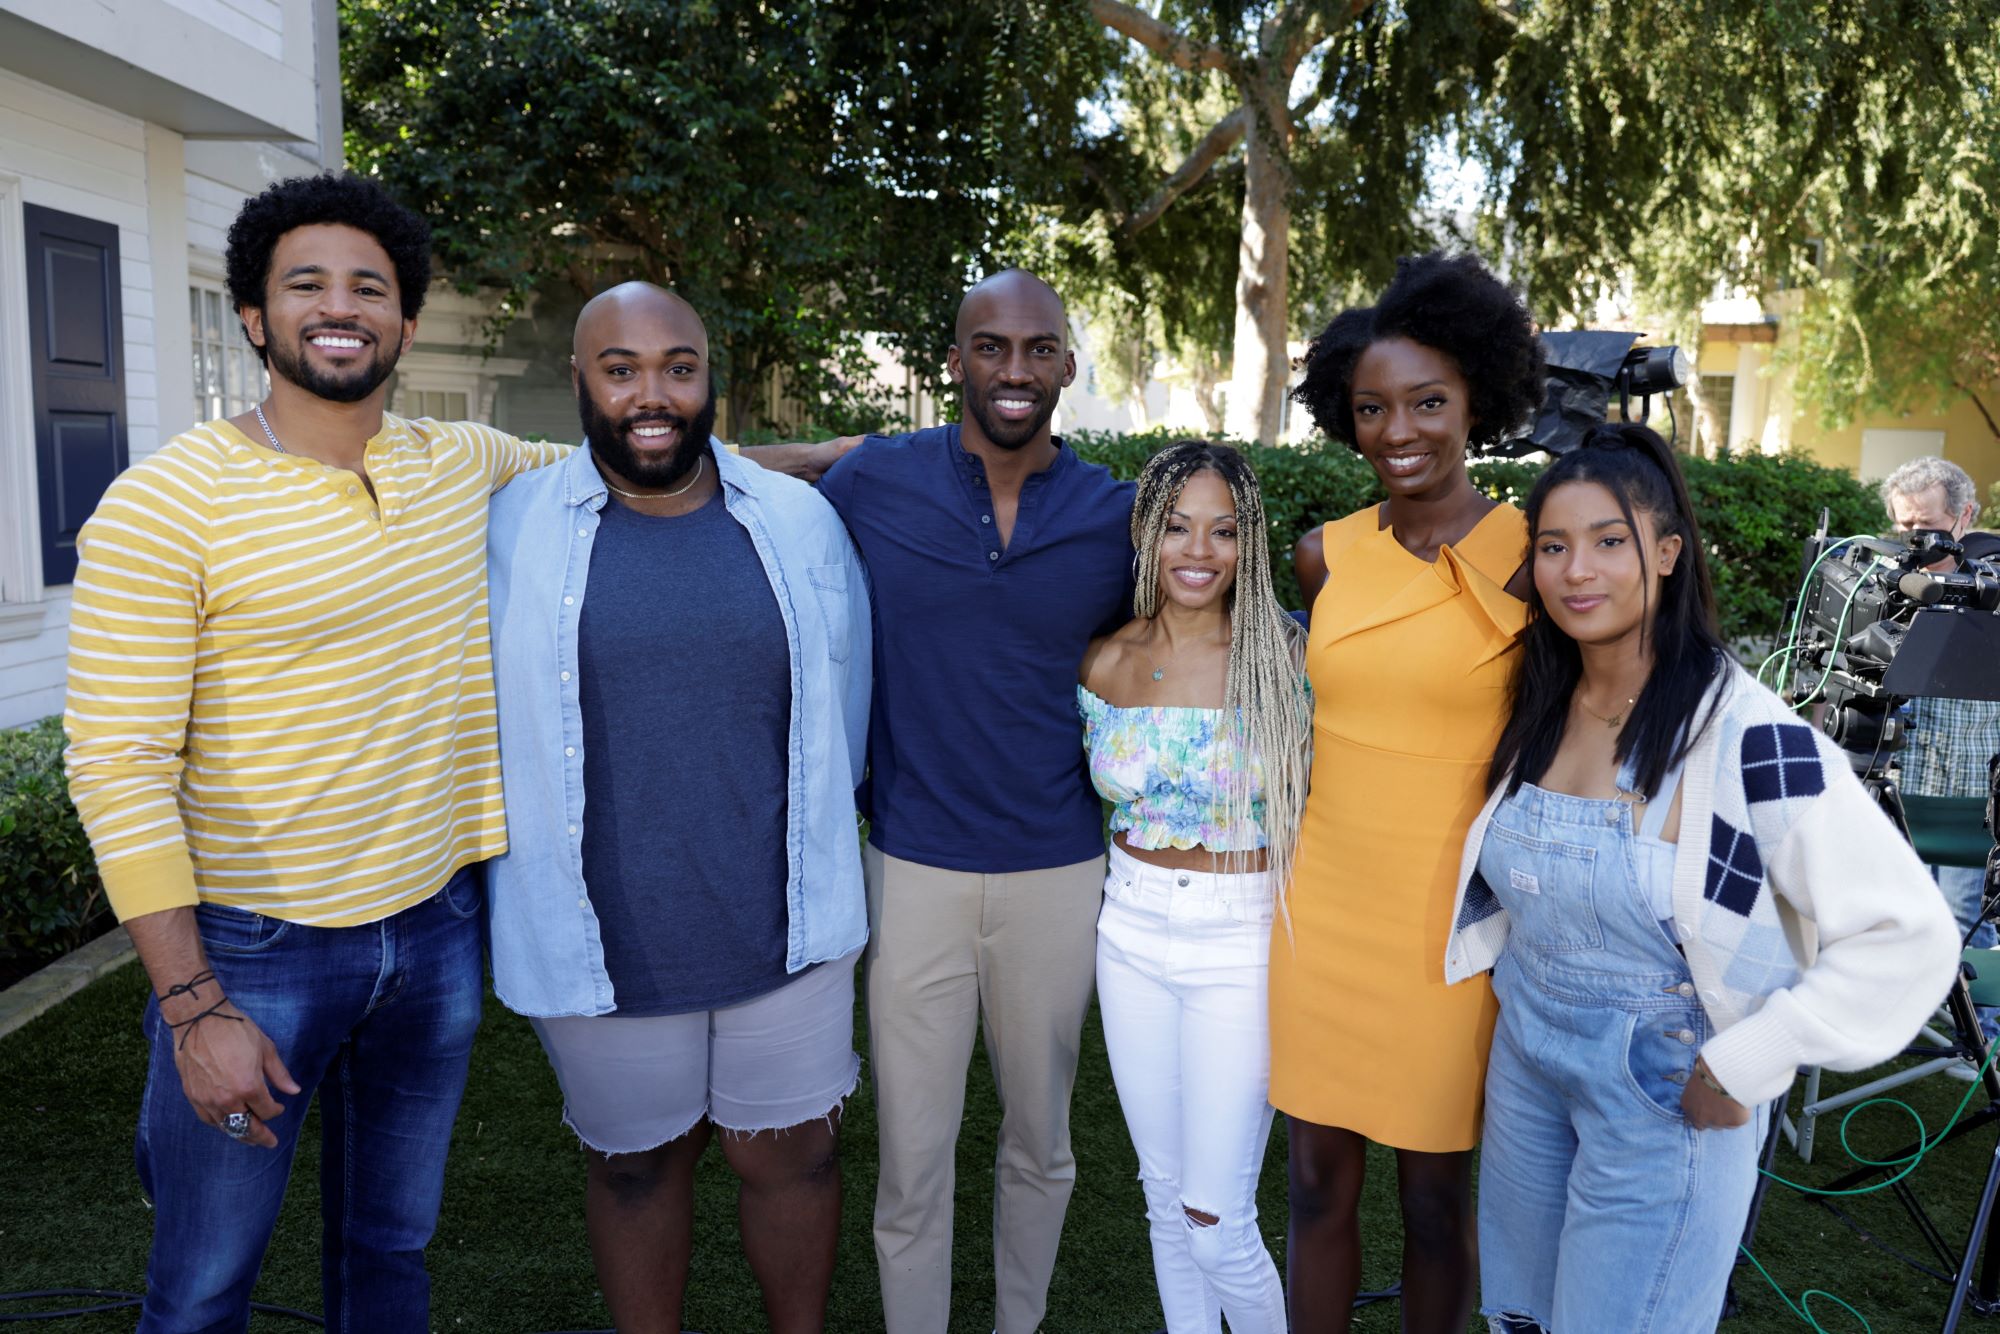 Kyland Young, Derek Frazier, Xavier Prather, Tiffany Mitchell, who will appear in the 'Big Brother 24' episode tonight, Aug. 24, Azah Awasum, and Hannah Chaddha pose for pictures.